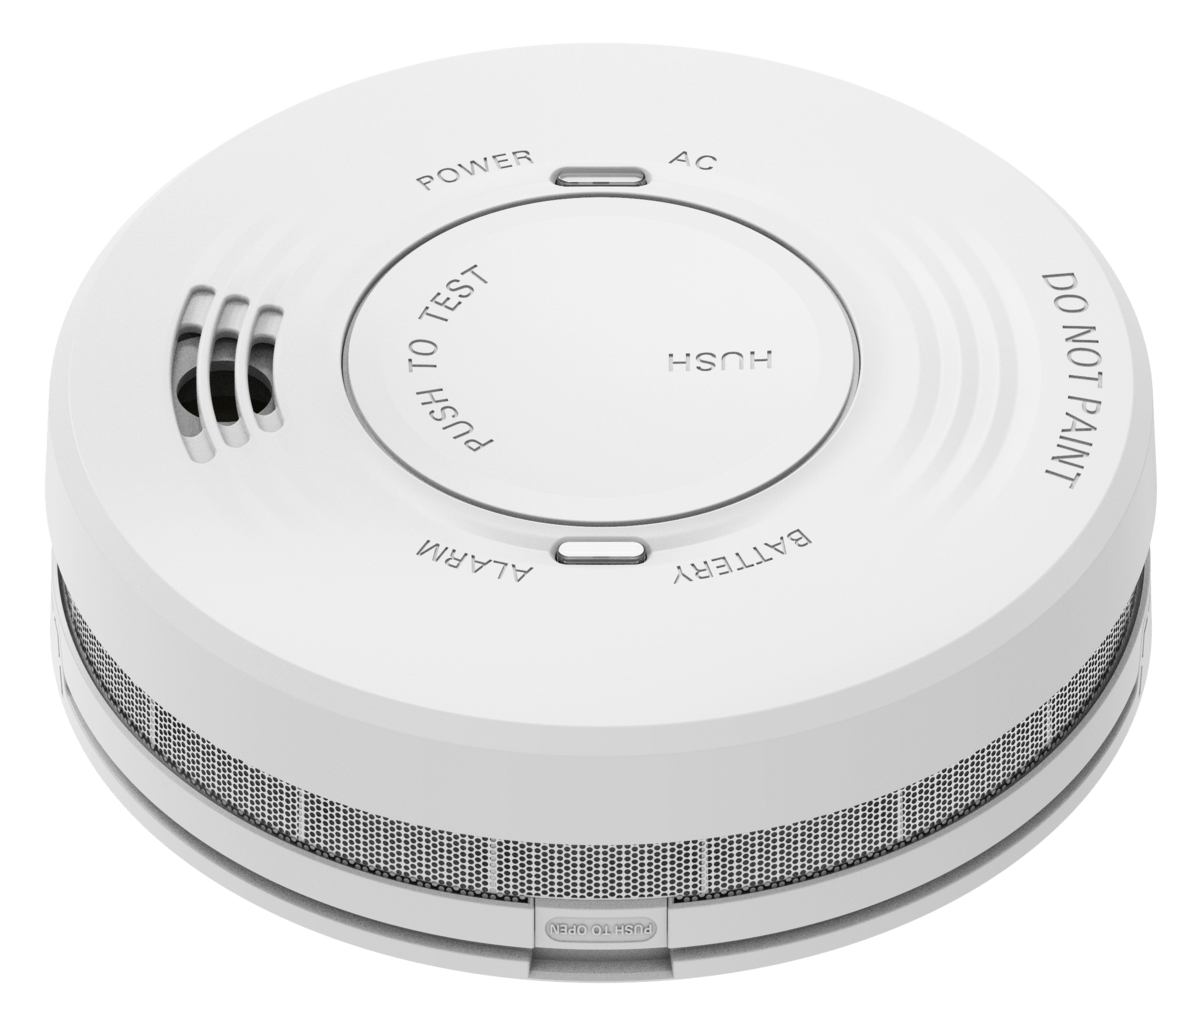 An image of a smoke alarm manufactured by 1300 Smoke Alarms.